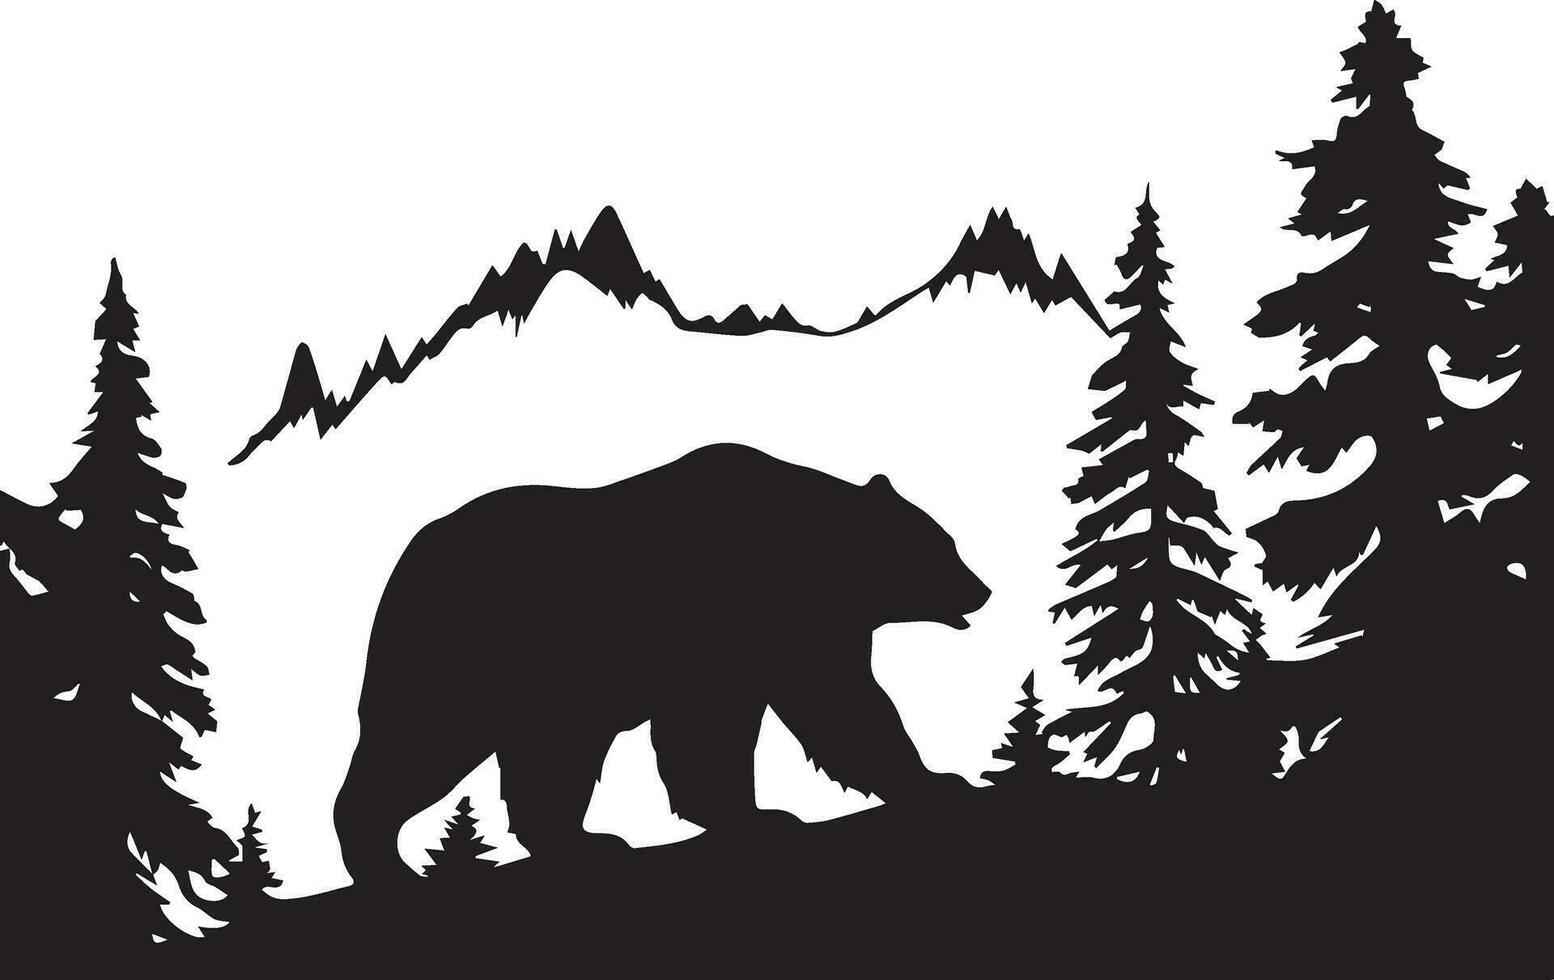 Bear On the forest vector silhouette illustration black color 4